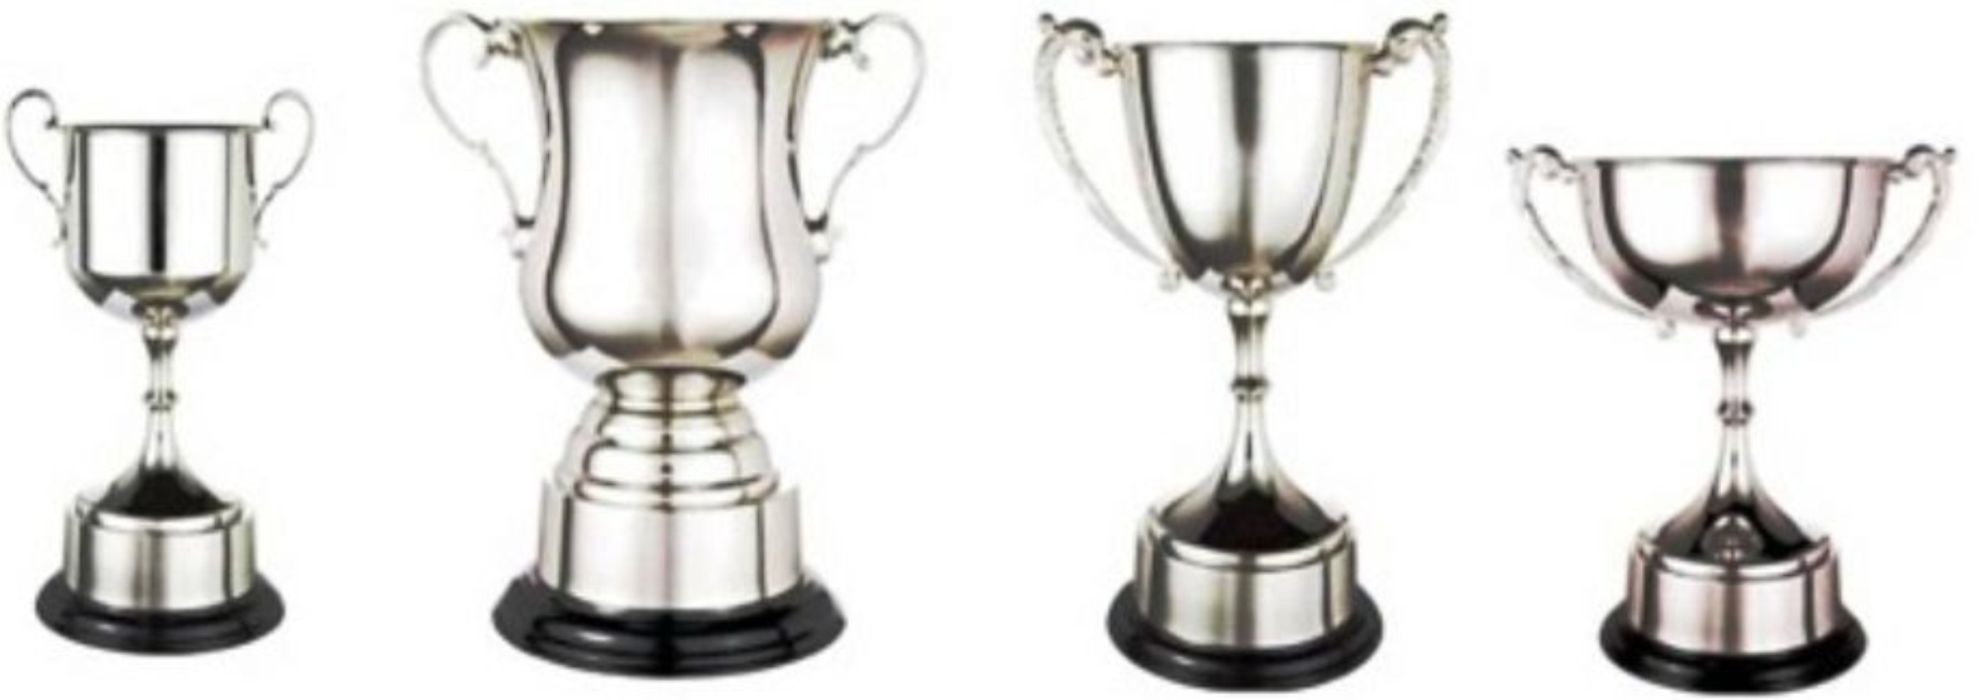 Up To 40% OFF Silver Plated Trophy Cups High Quality - Trophy Finder